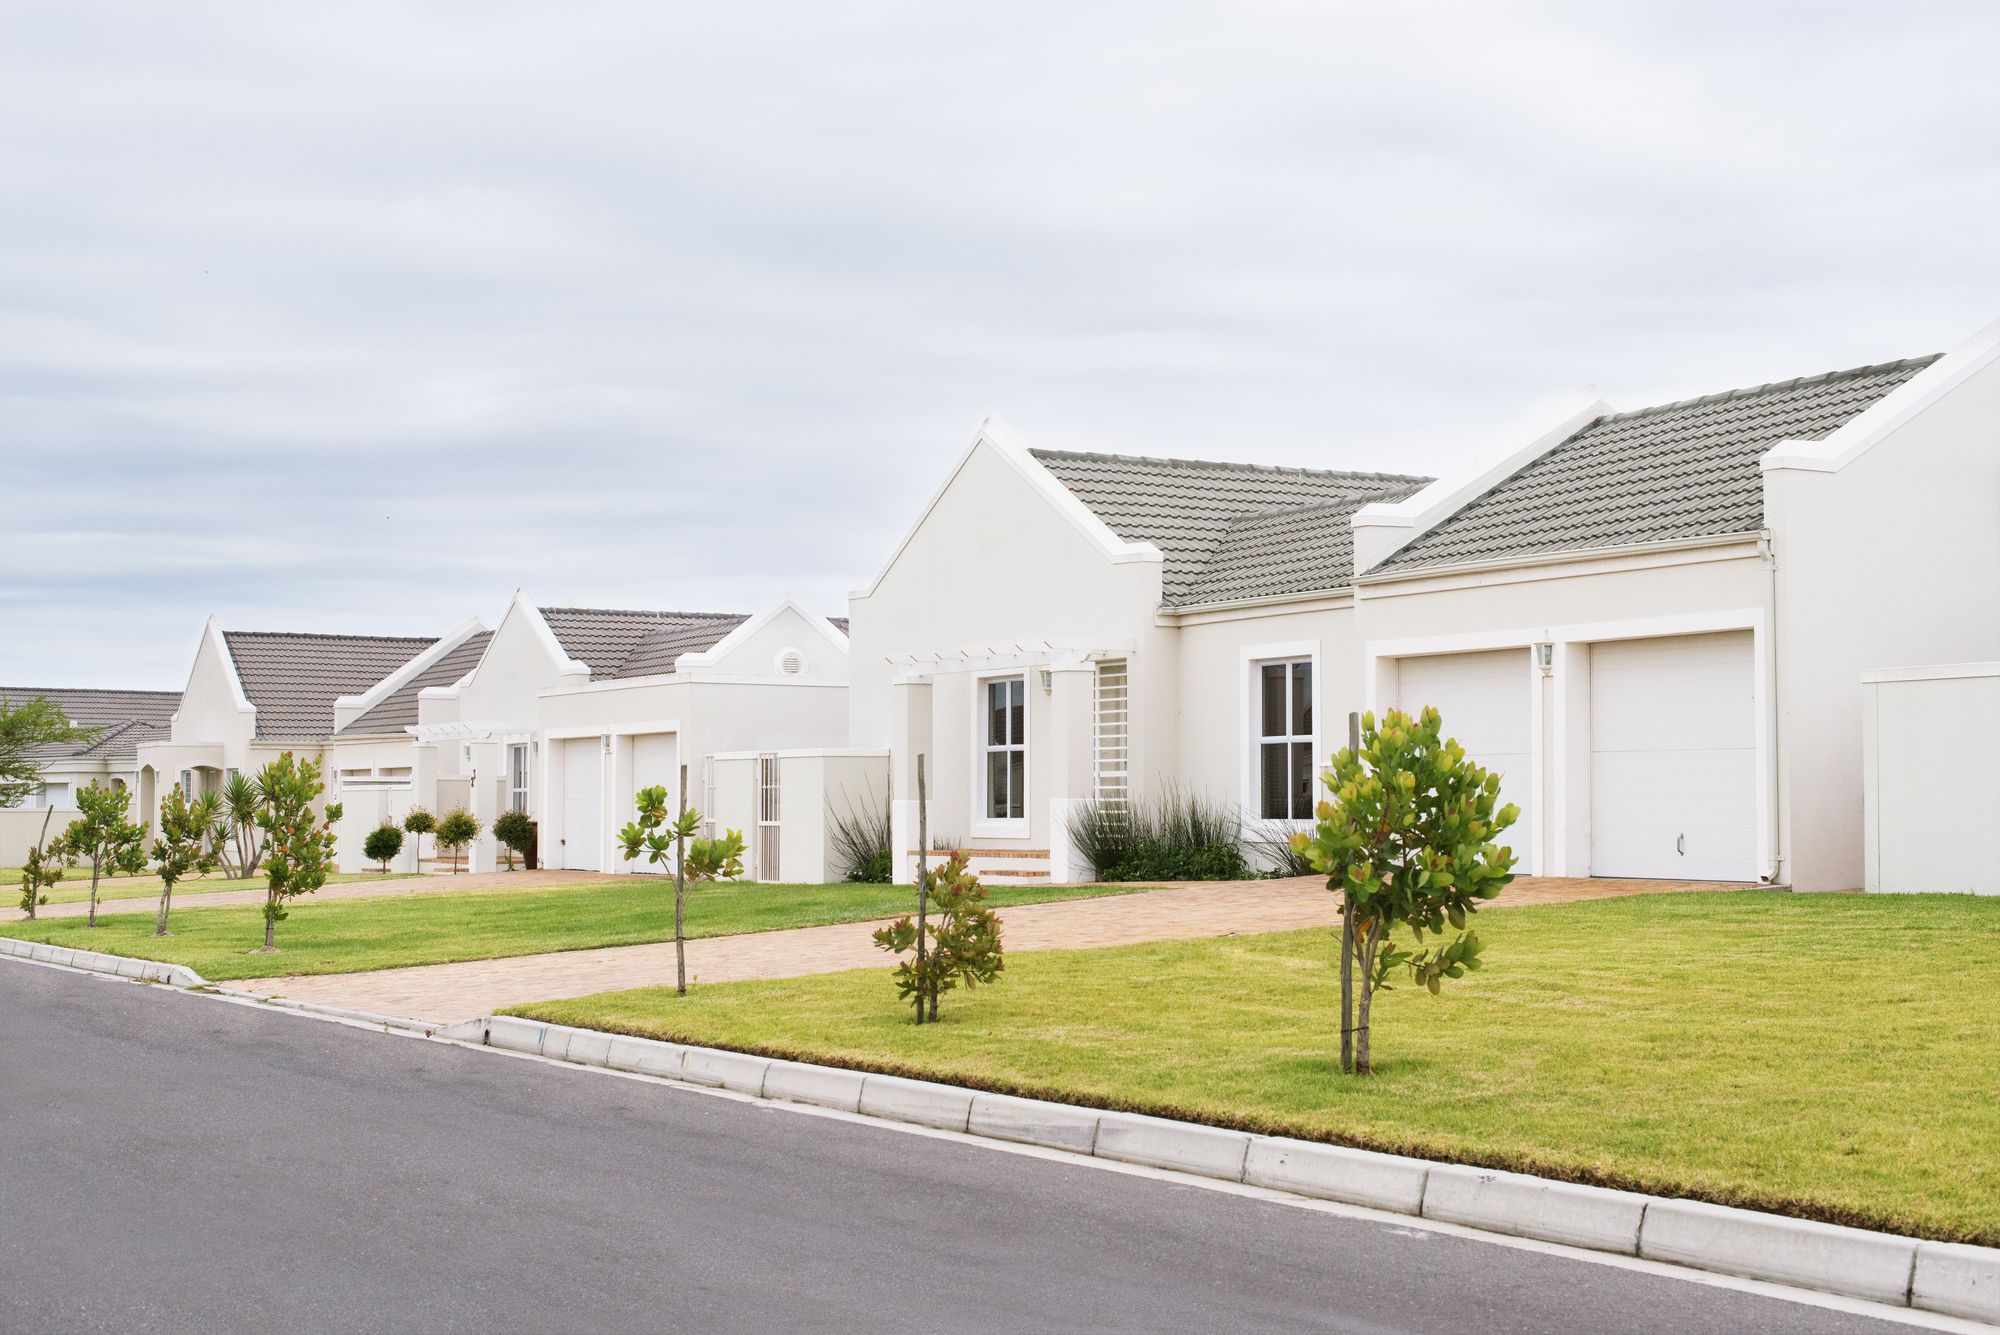 Should You Buy a Home in a Planned Community?